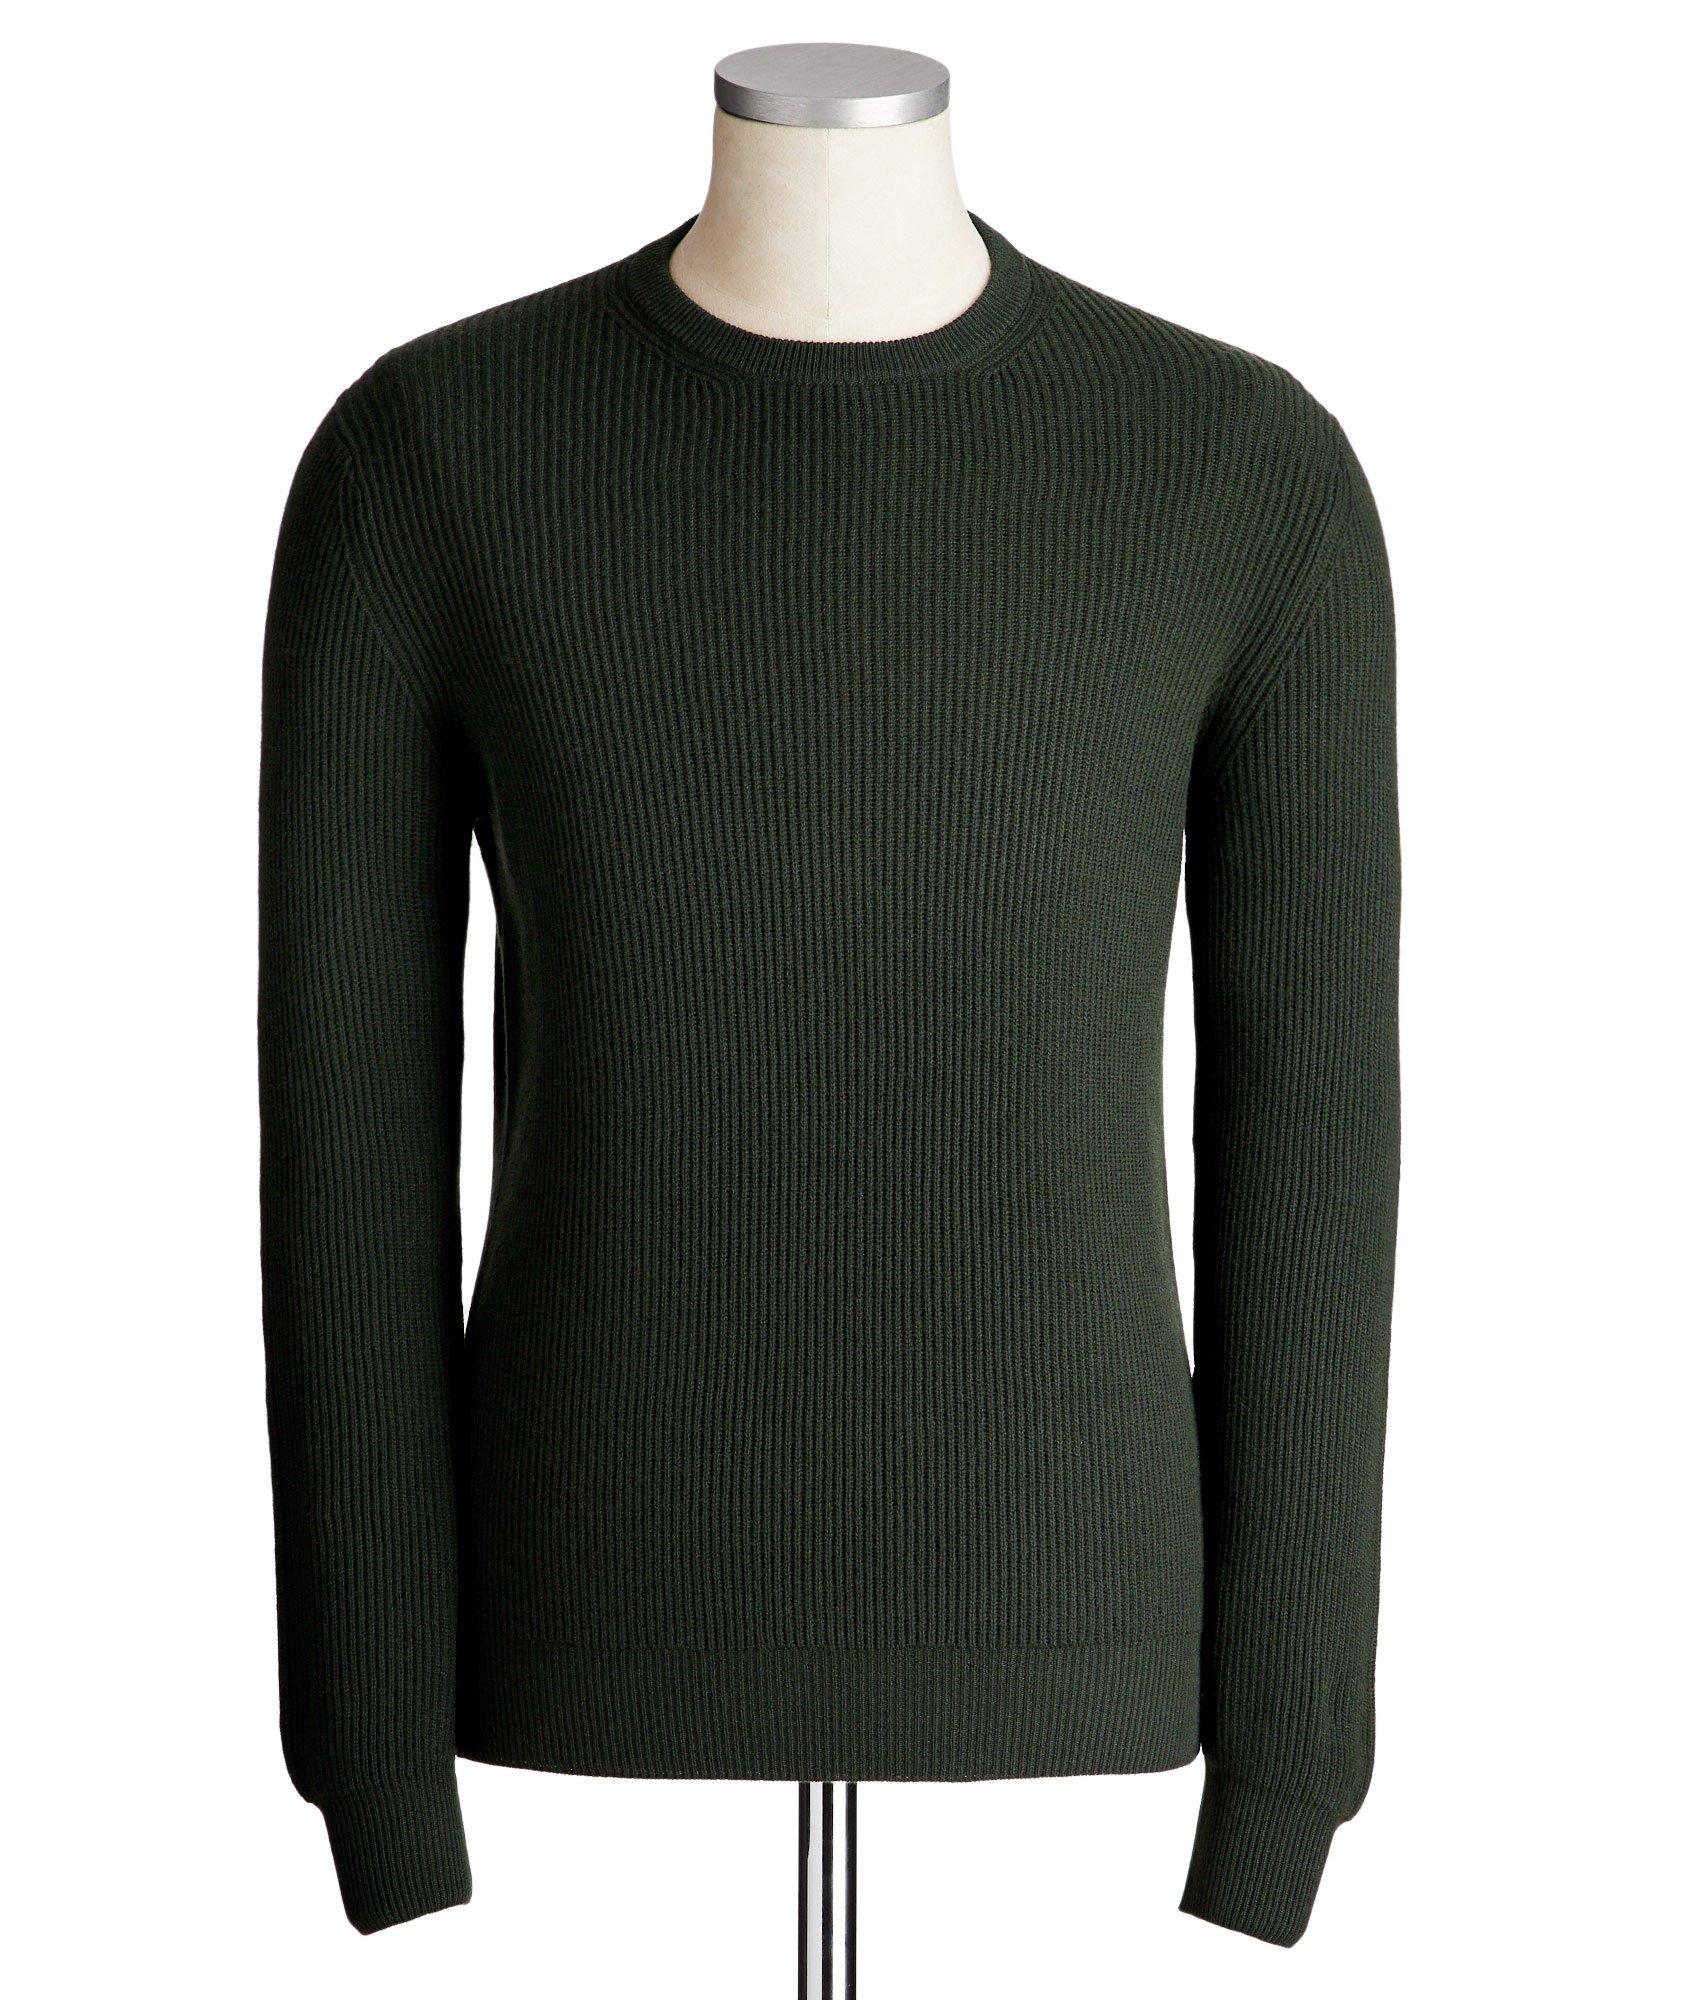 Ribbed Cashmere Sweater image 0